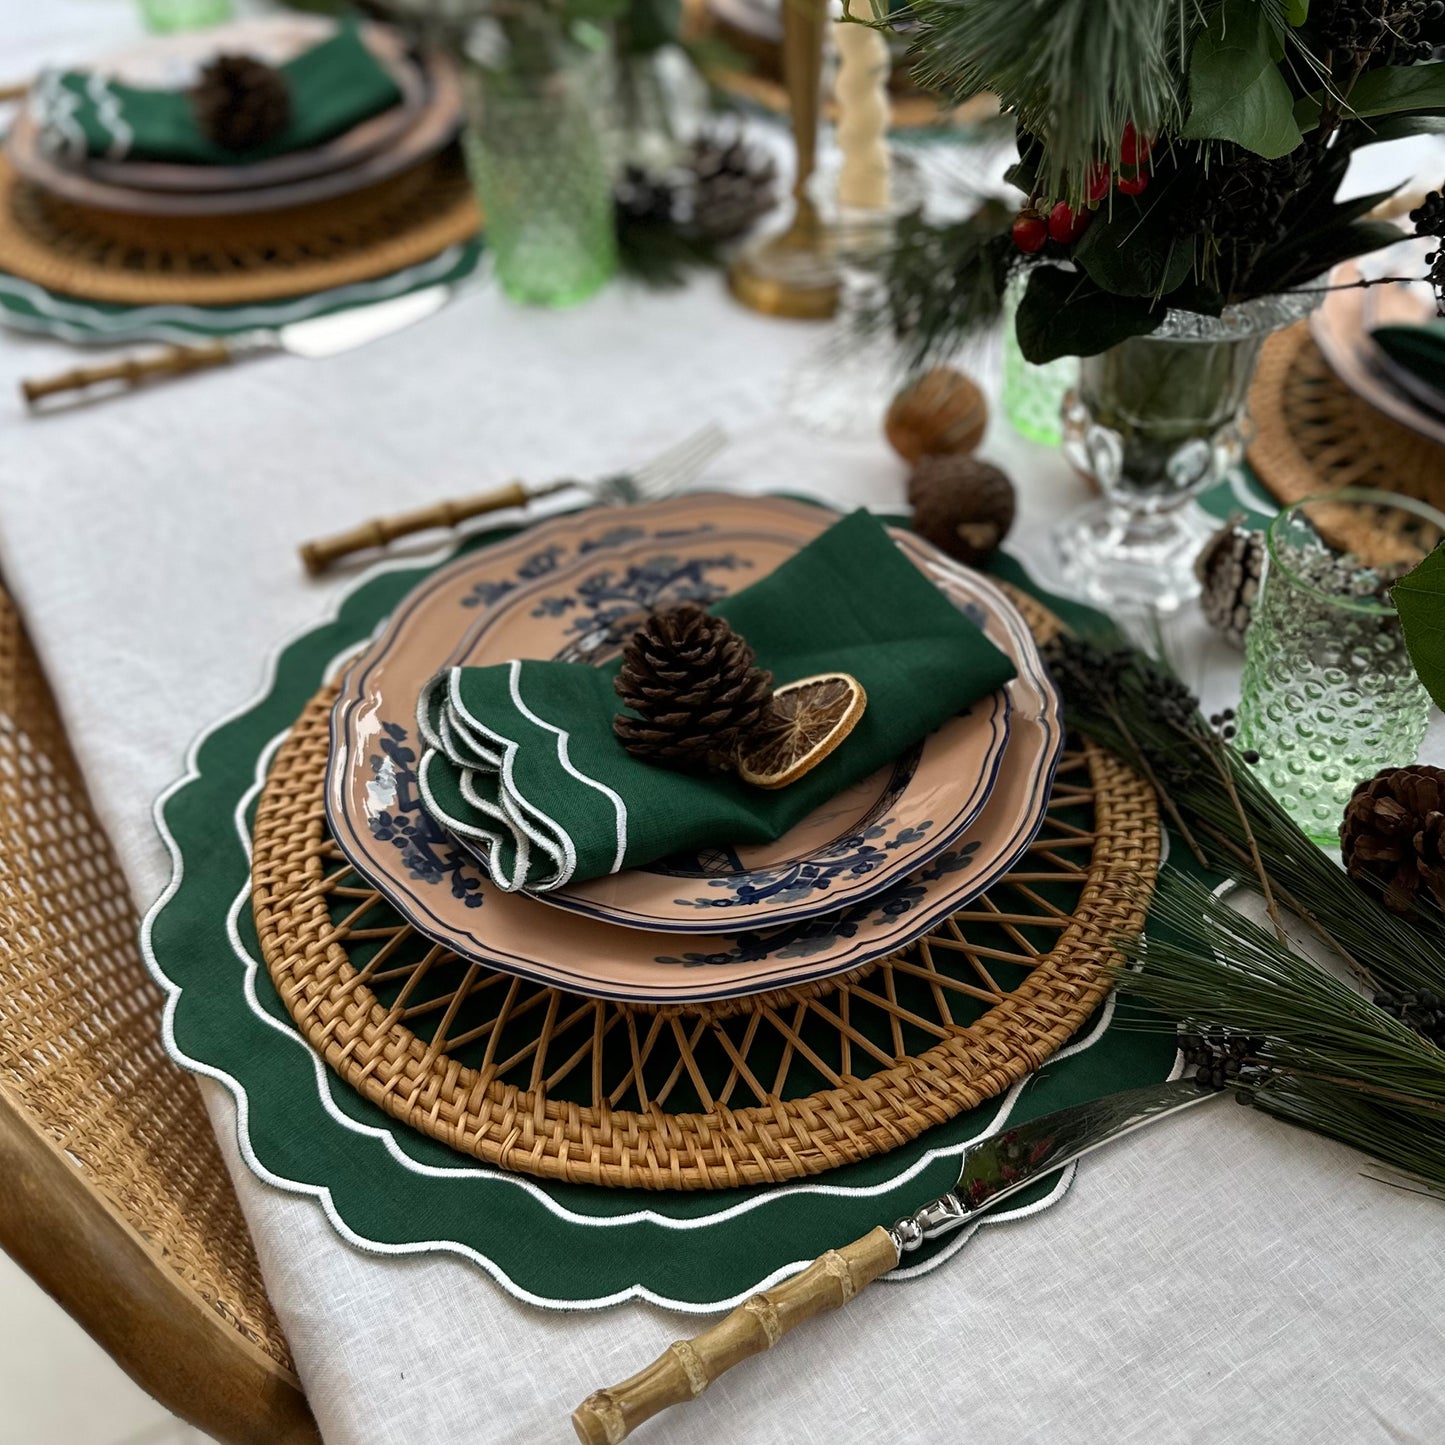 Set of 4 - Linen Scalloped Edged Placemats - Emerald Green